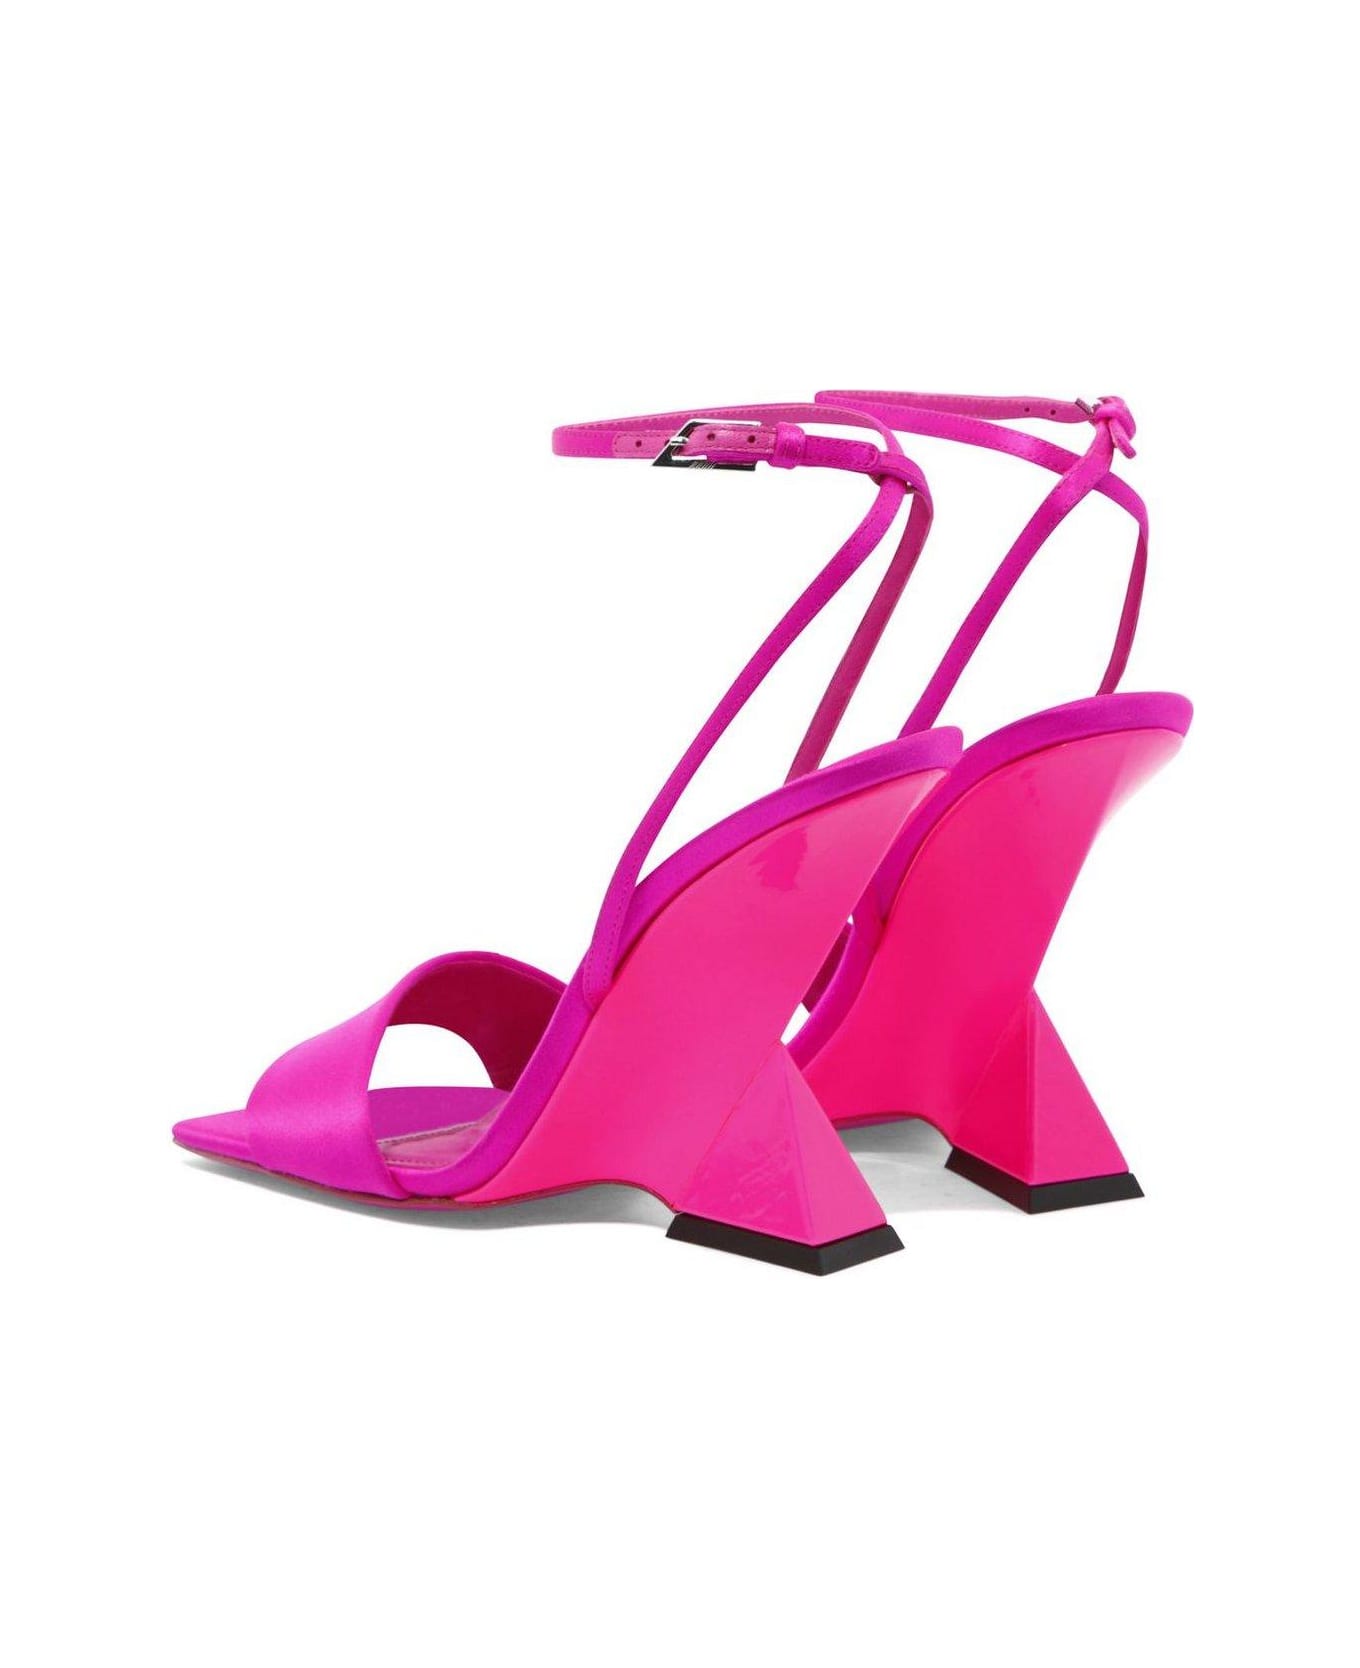 The Attico Block Heel Ankle Strapped Sandals